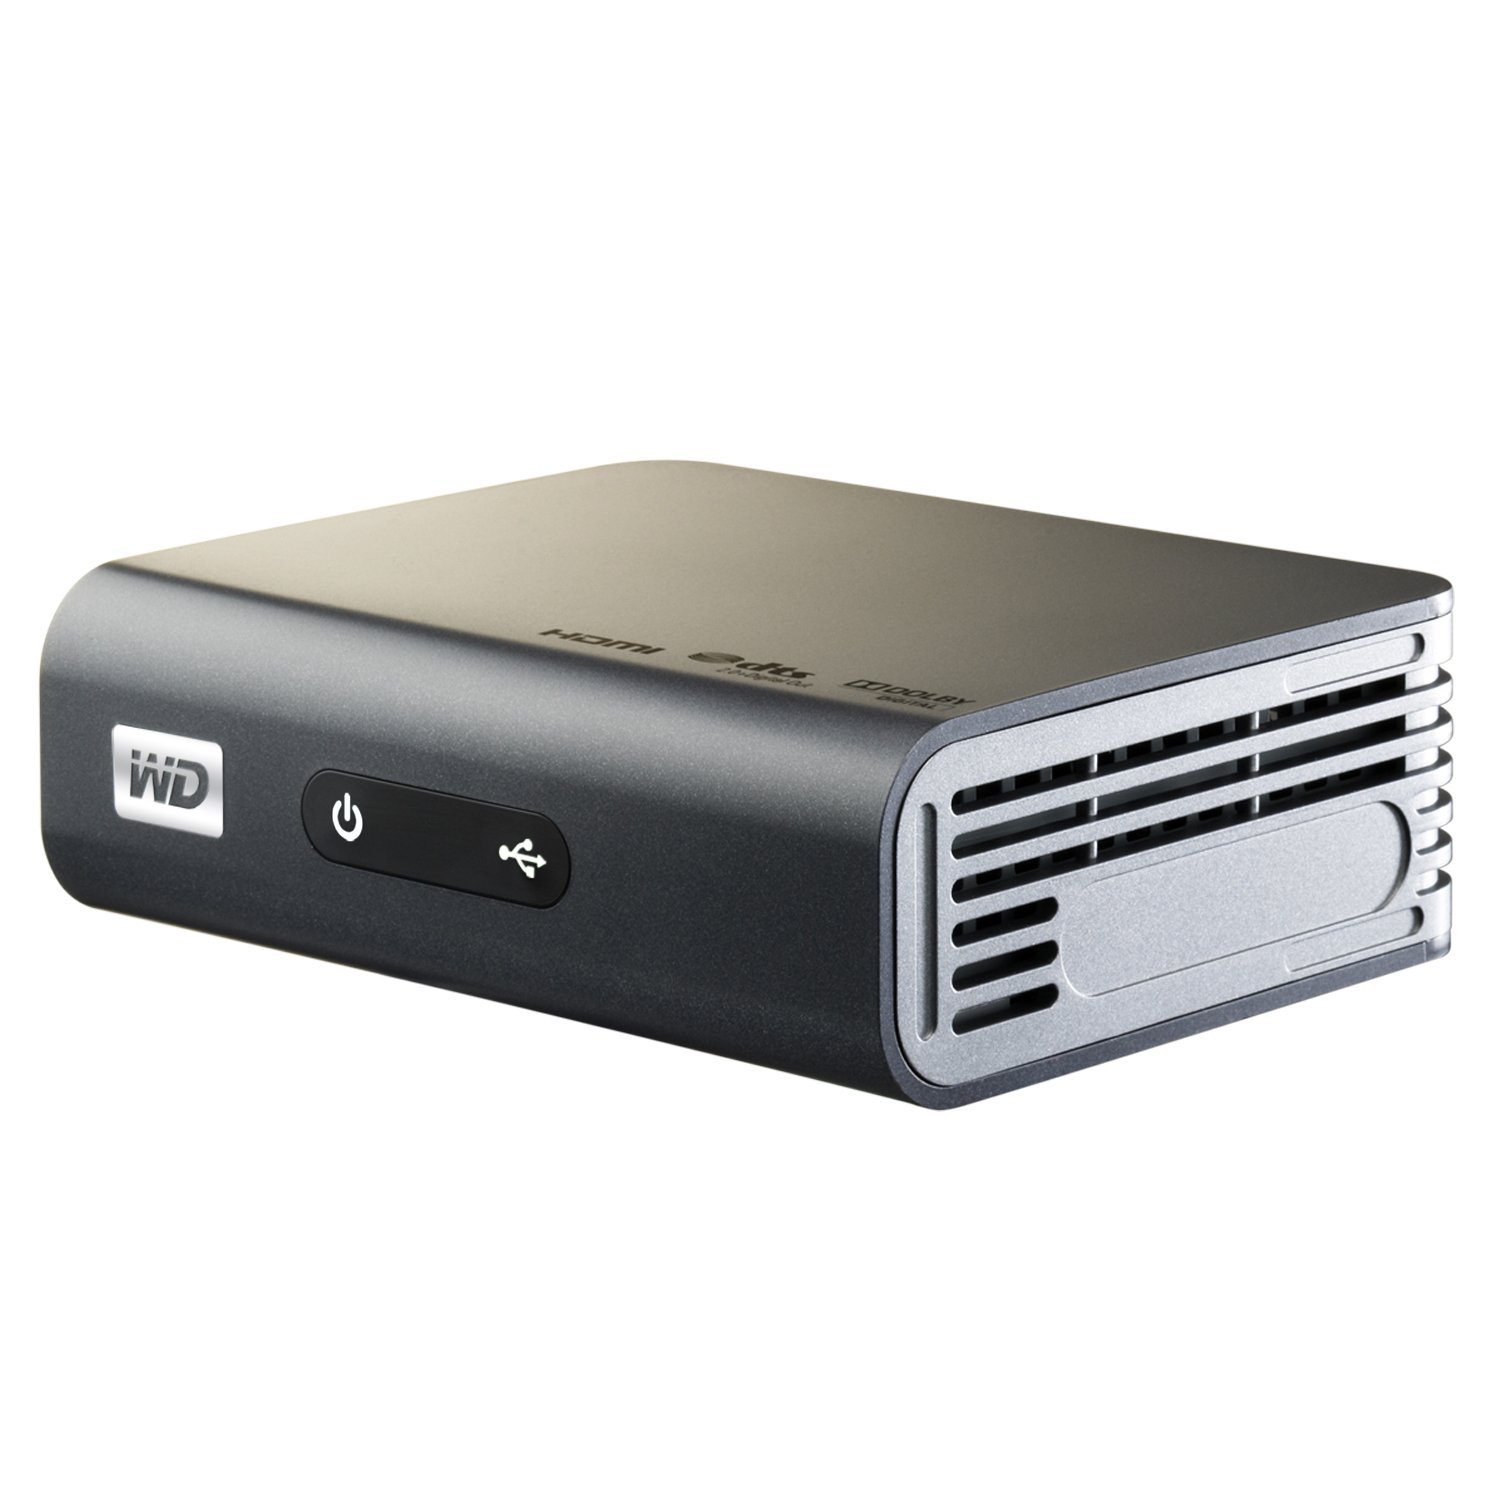 http://thetechjournal.com/wp-content/uploads/images/1107/1312108722-western-digital-wd-tv-live-plus-1080p-hd-media-player-7.jpg